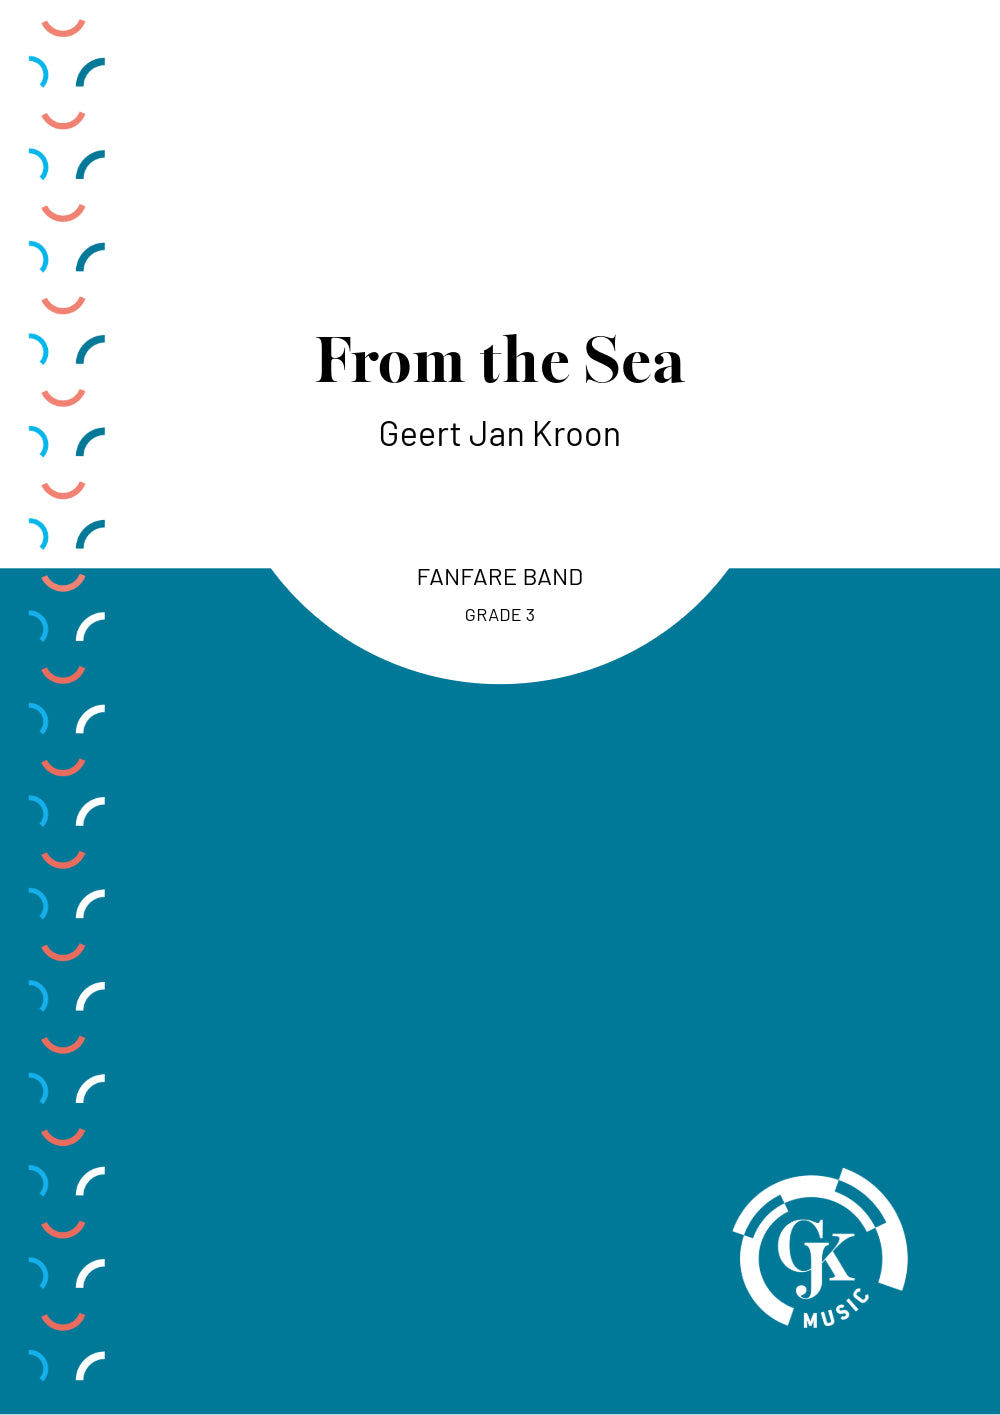 From the Sea - Fanfare